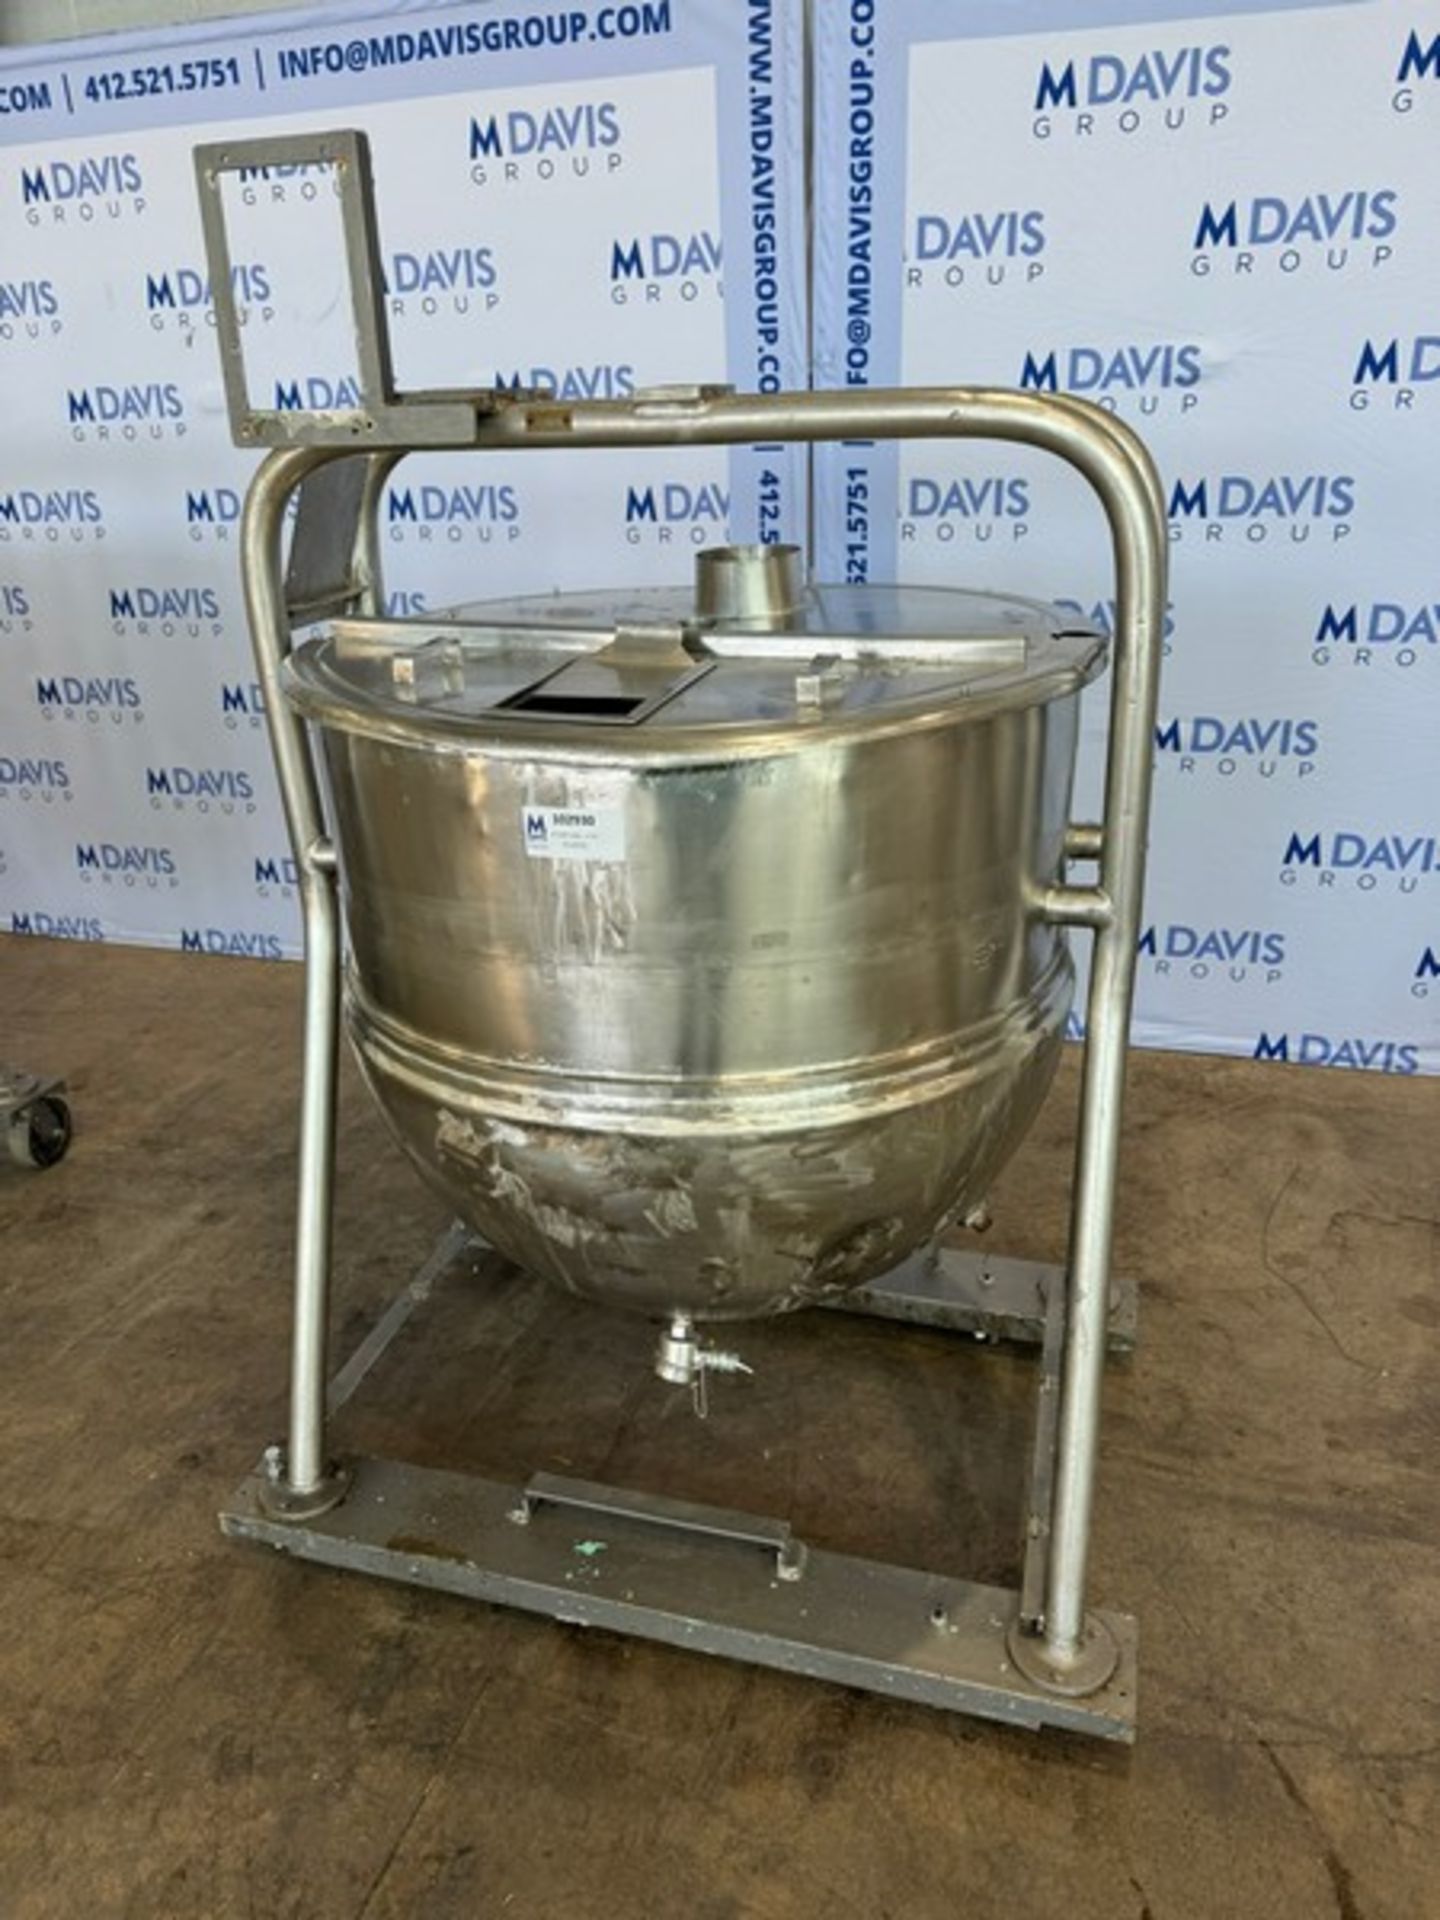 Aprox. 125 Gal. S/S Kettle, with S/S Agitation Bridge, with (2) S/S Lids, Mounted on S/S Portable